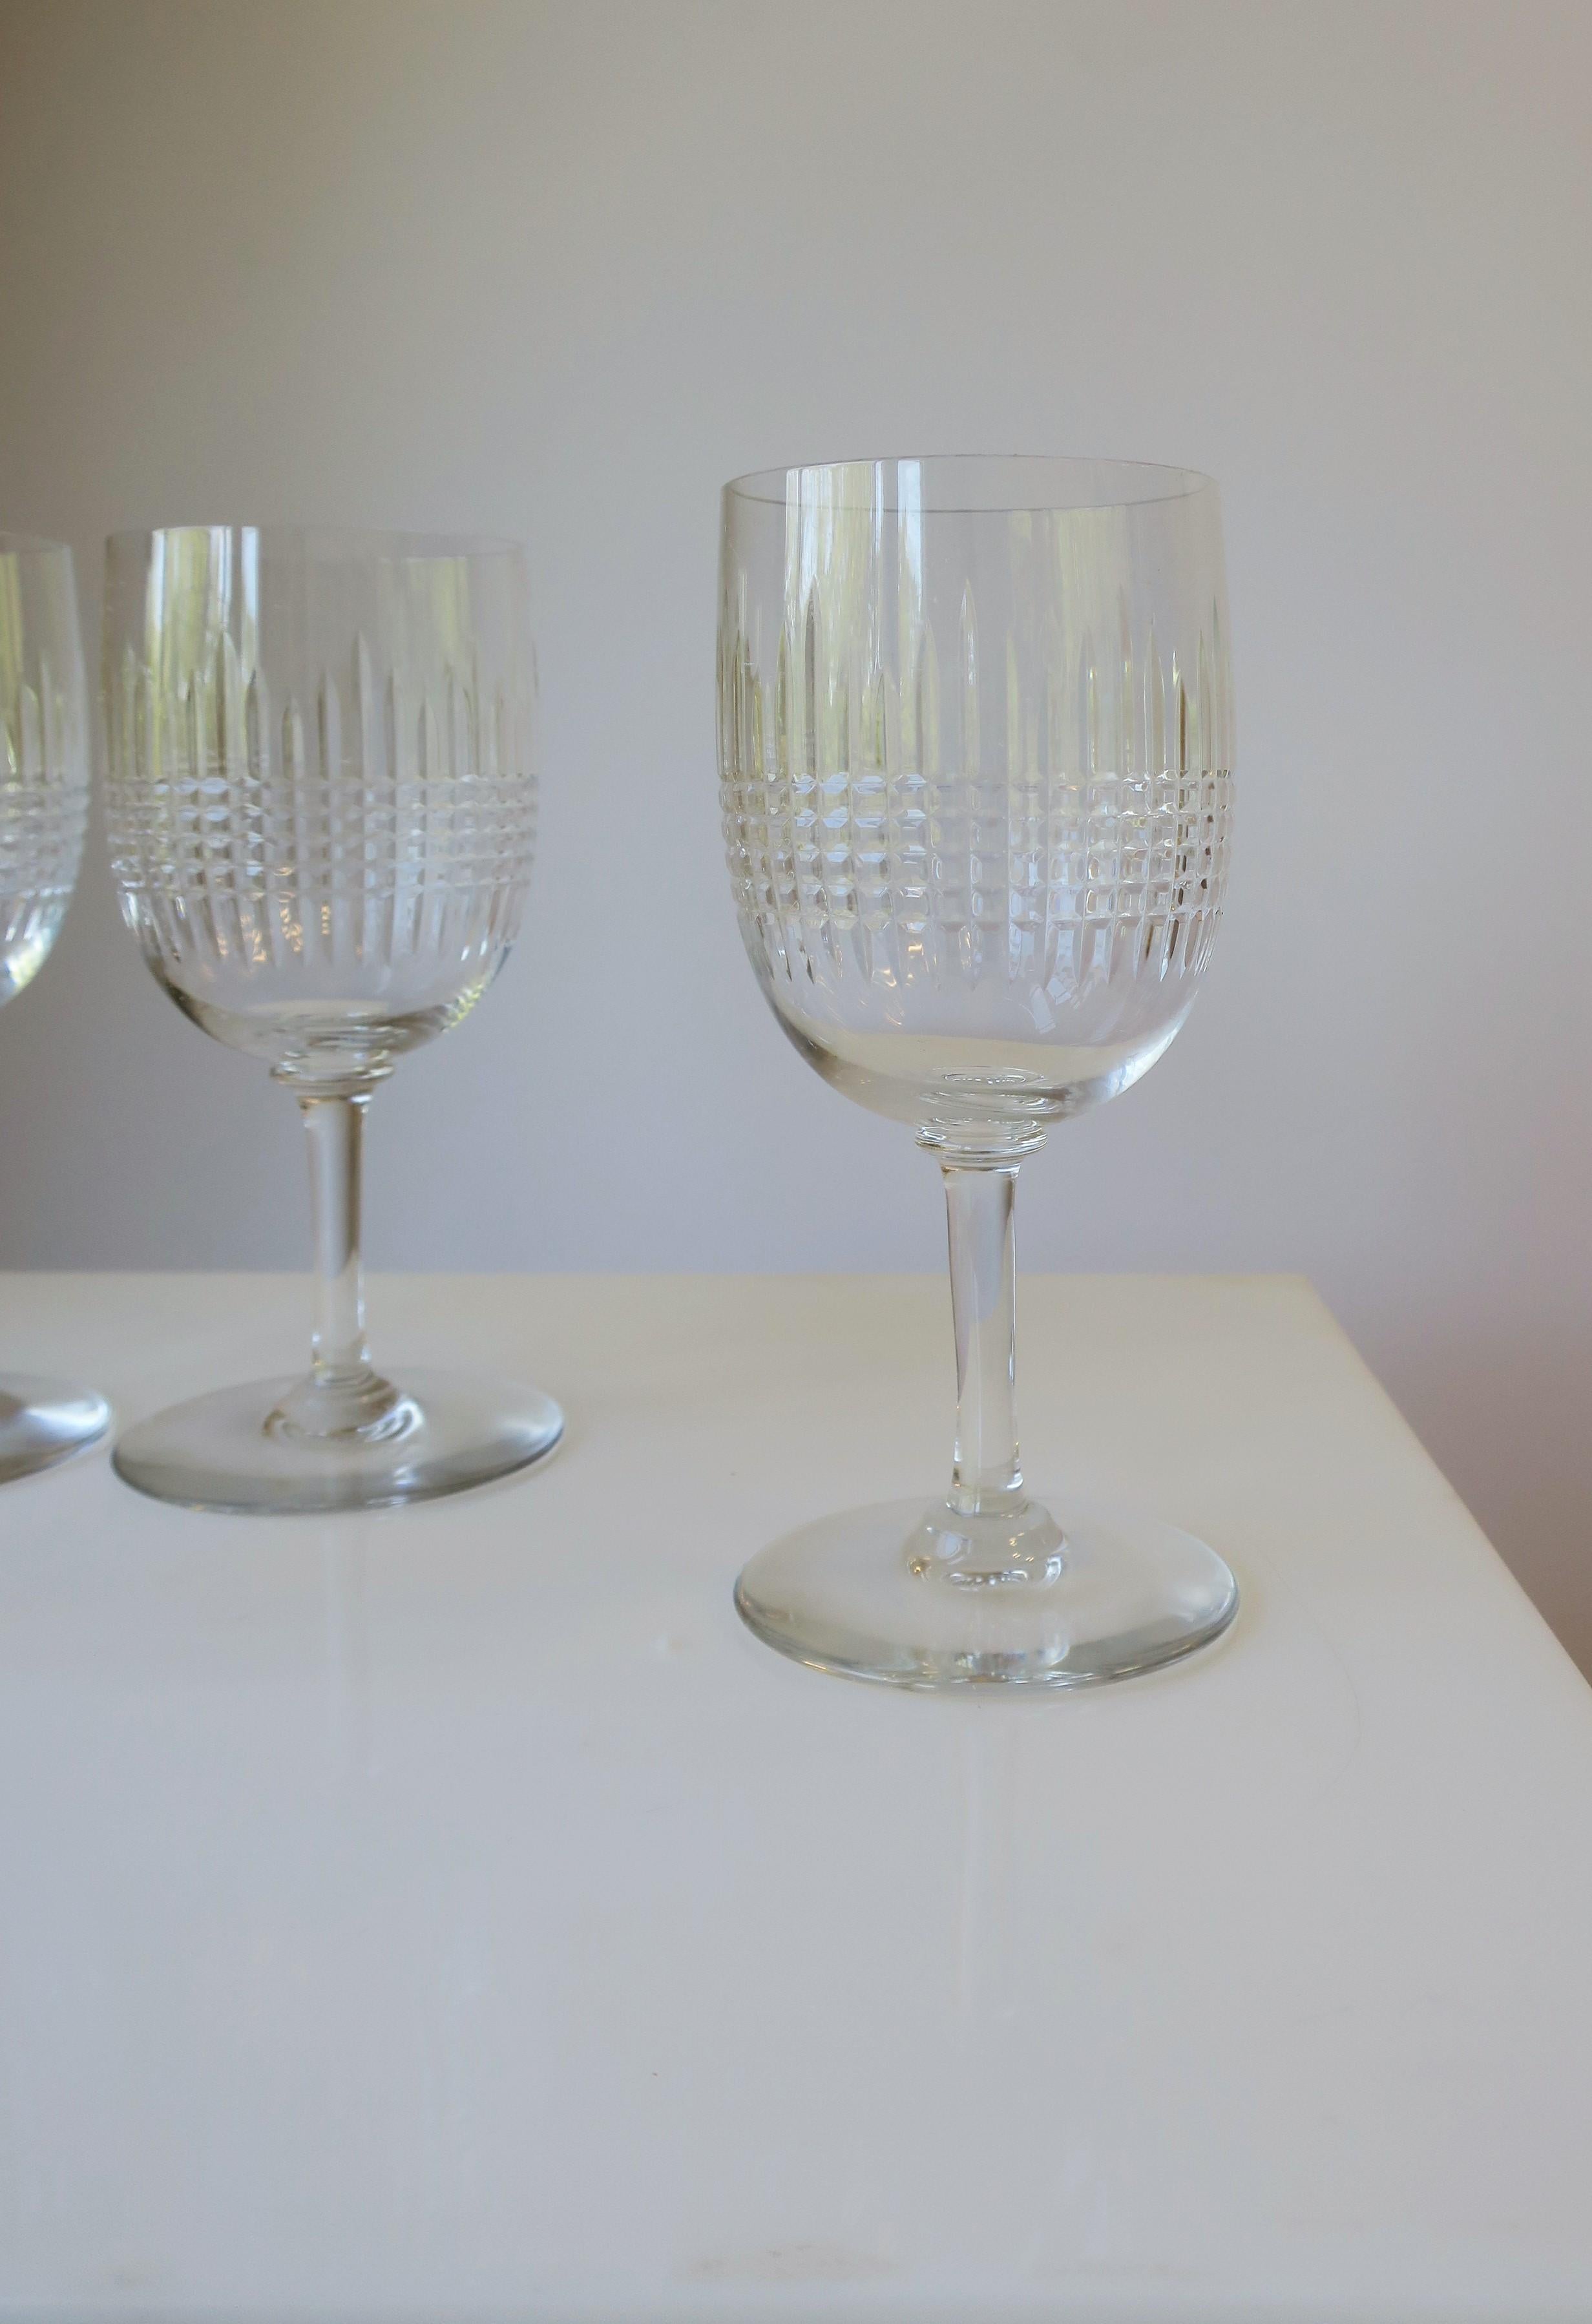 Set of 4 Baccarat French Cut Crystal Wine Glasses, 8 Available 3